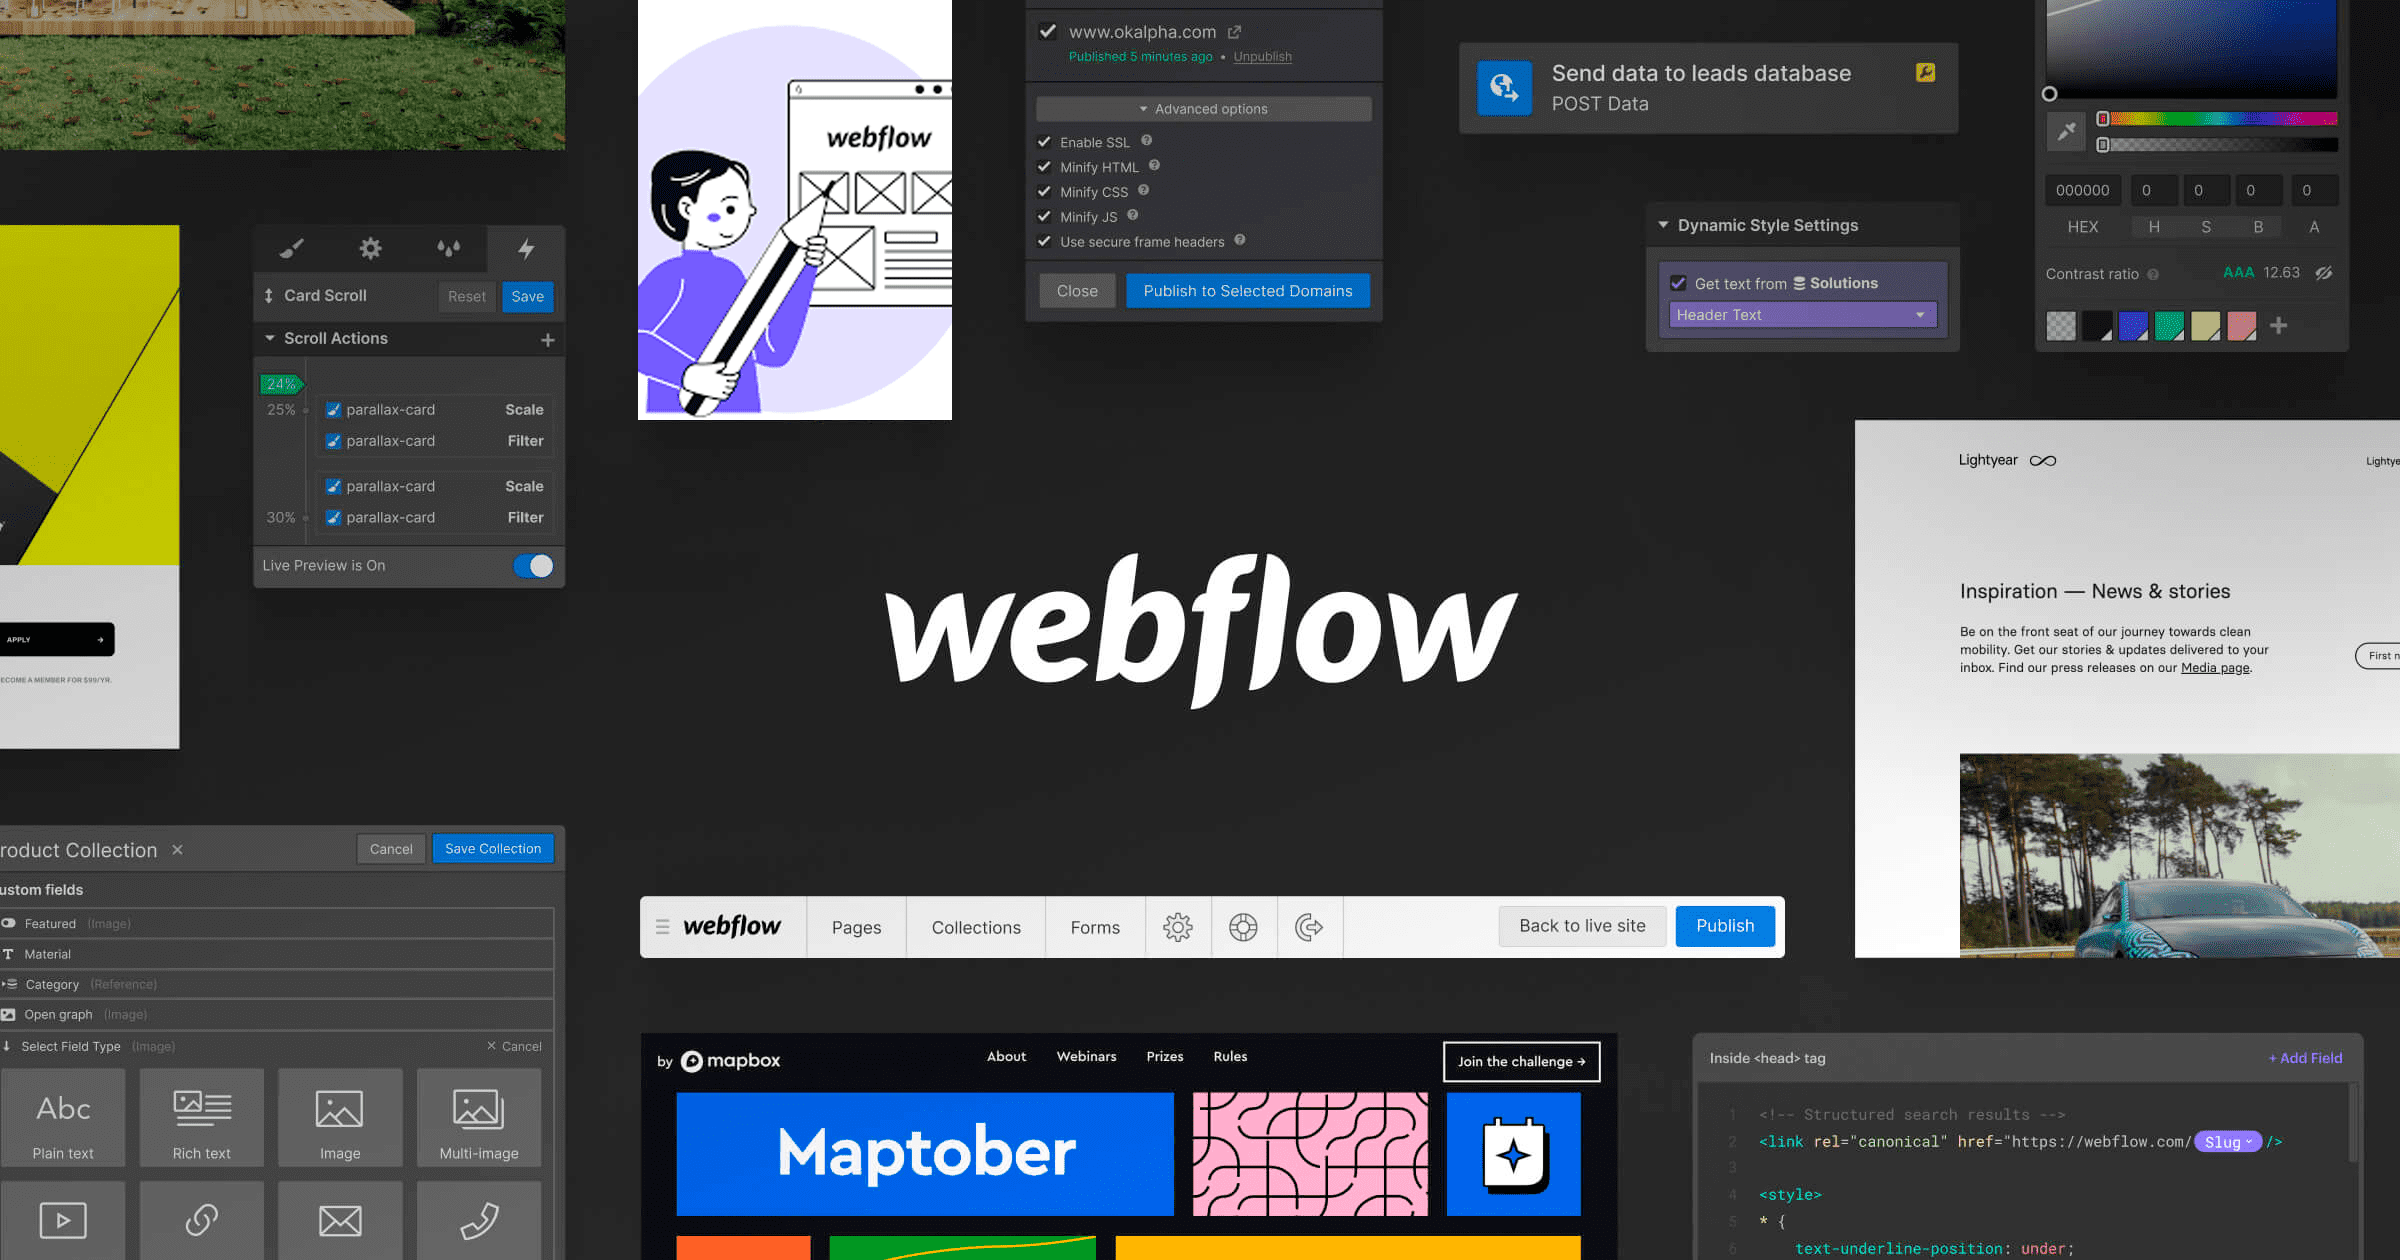 Best Practices for Designing and Developing Website using Webflow